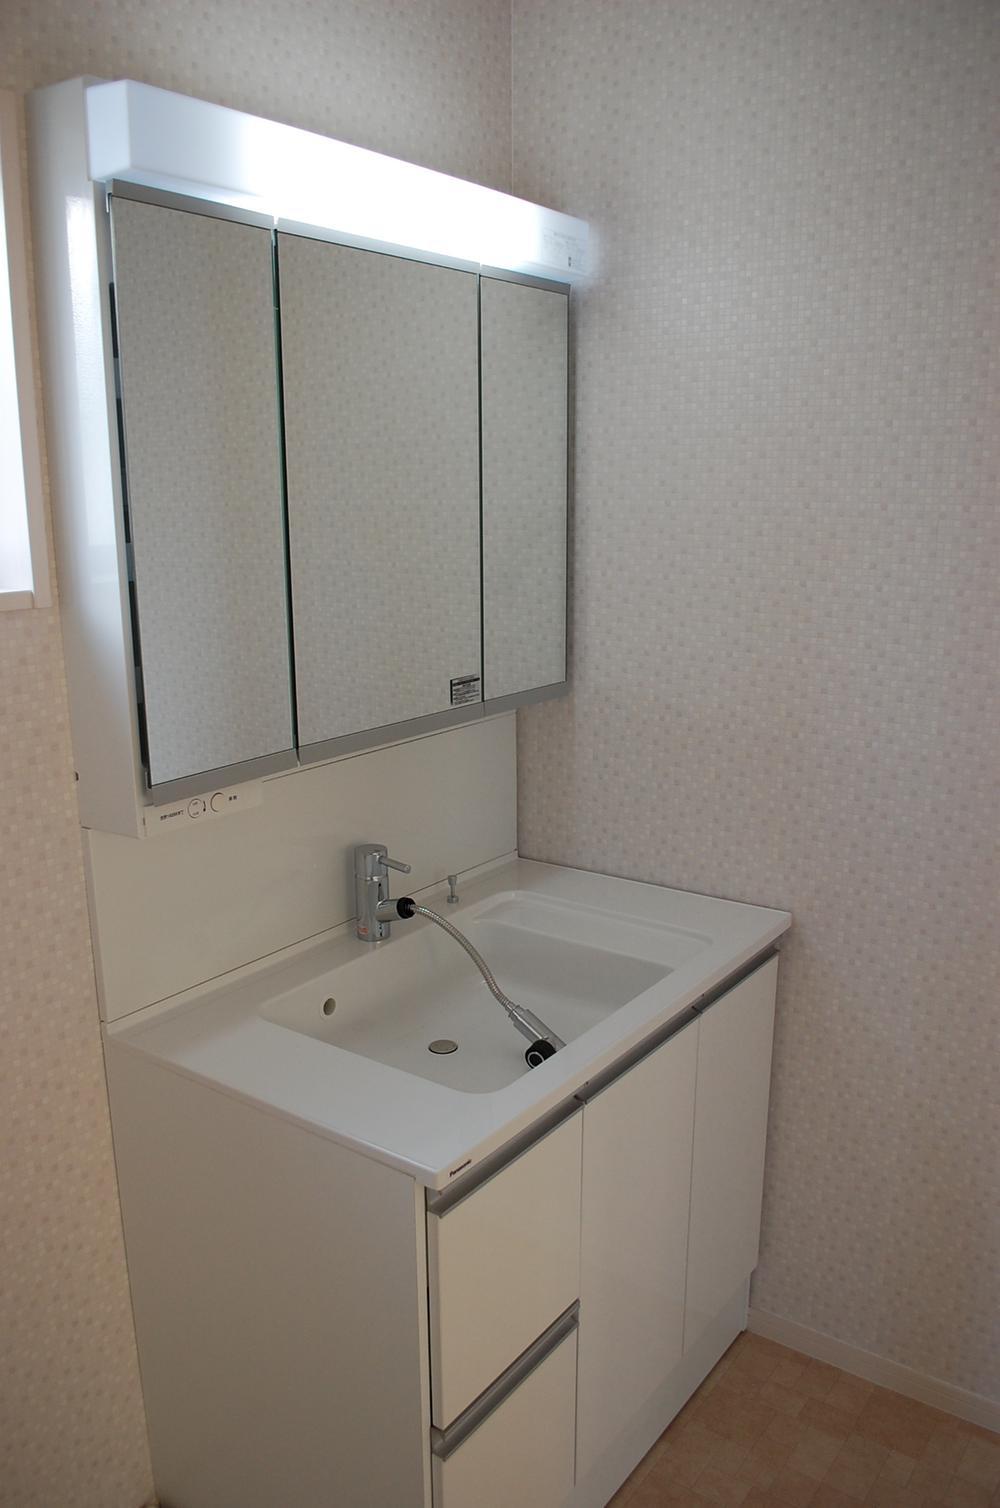 Wash basin, toilet. LIXIL made. Shower Faucets. Three-sided mirror.